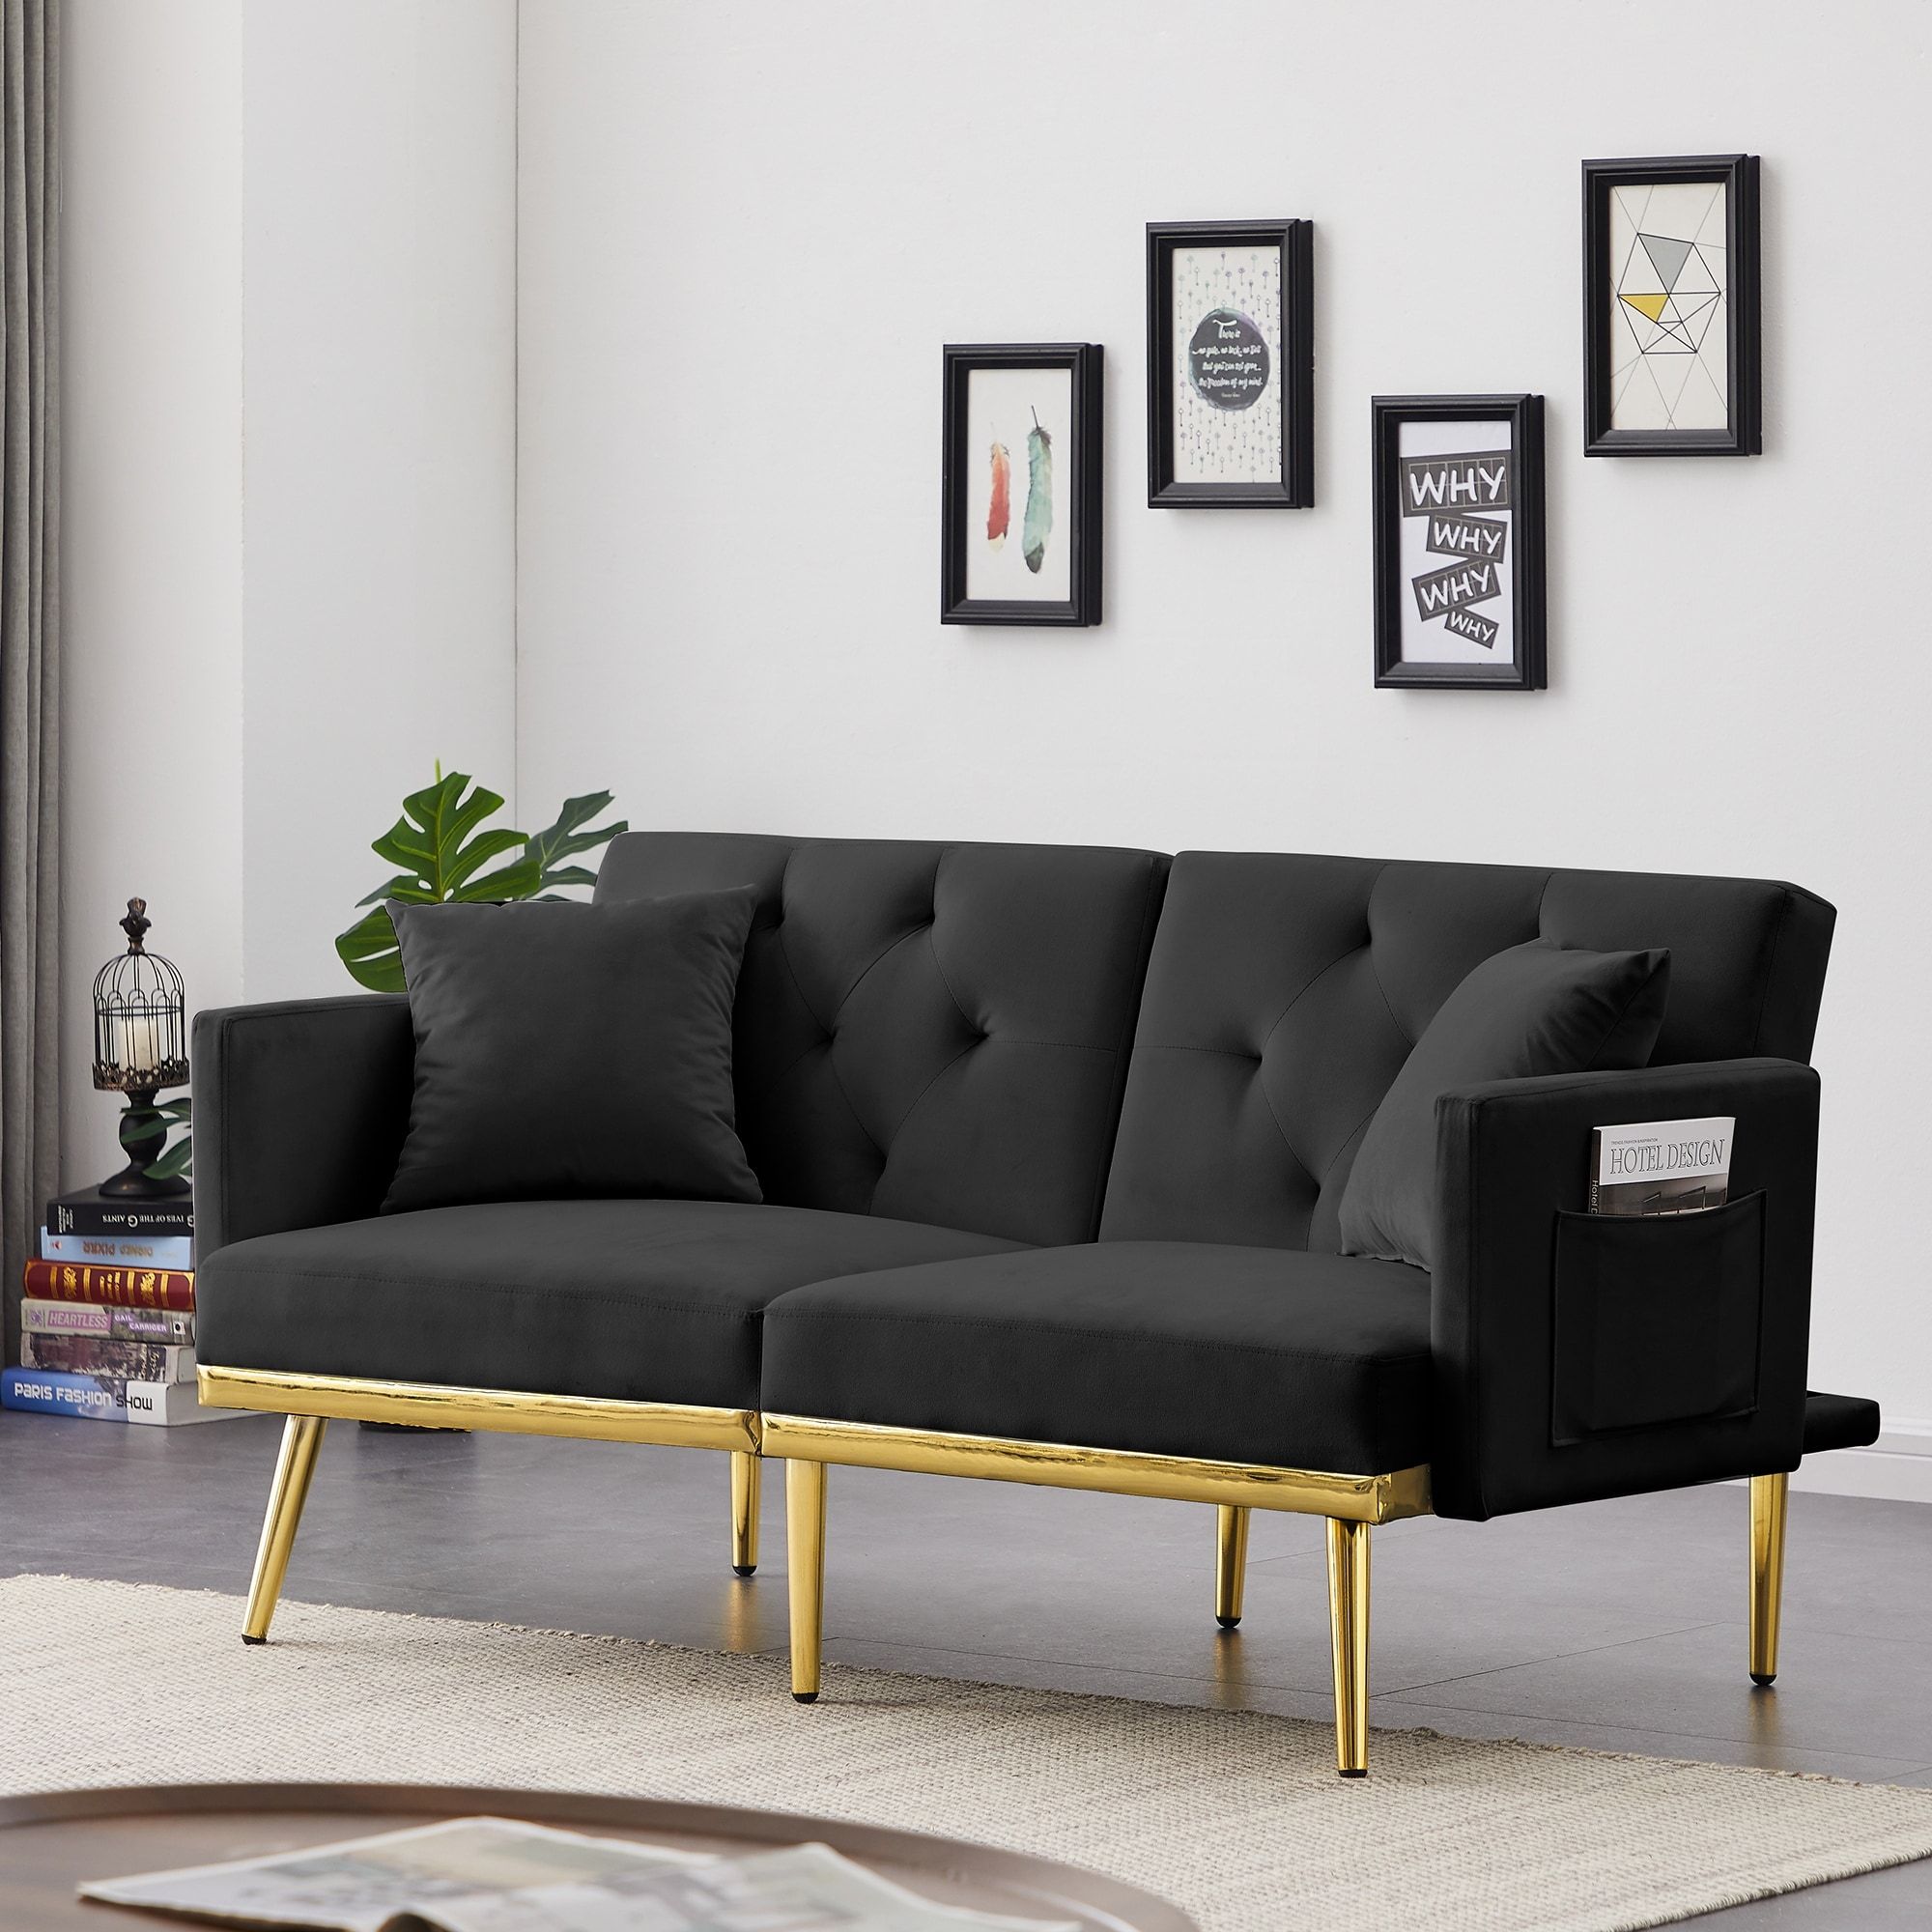 Velvet Futon Sofa Bed Convertible Folding Lounge Couch For Apartment Dorm,  Modern Loveseat With Armrest, Gold Metal Legs – Bed Bath & Beyond – 36687086 Intended For 2 Seater Black Velvet Sofa Beds (View 8 of 15)